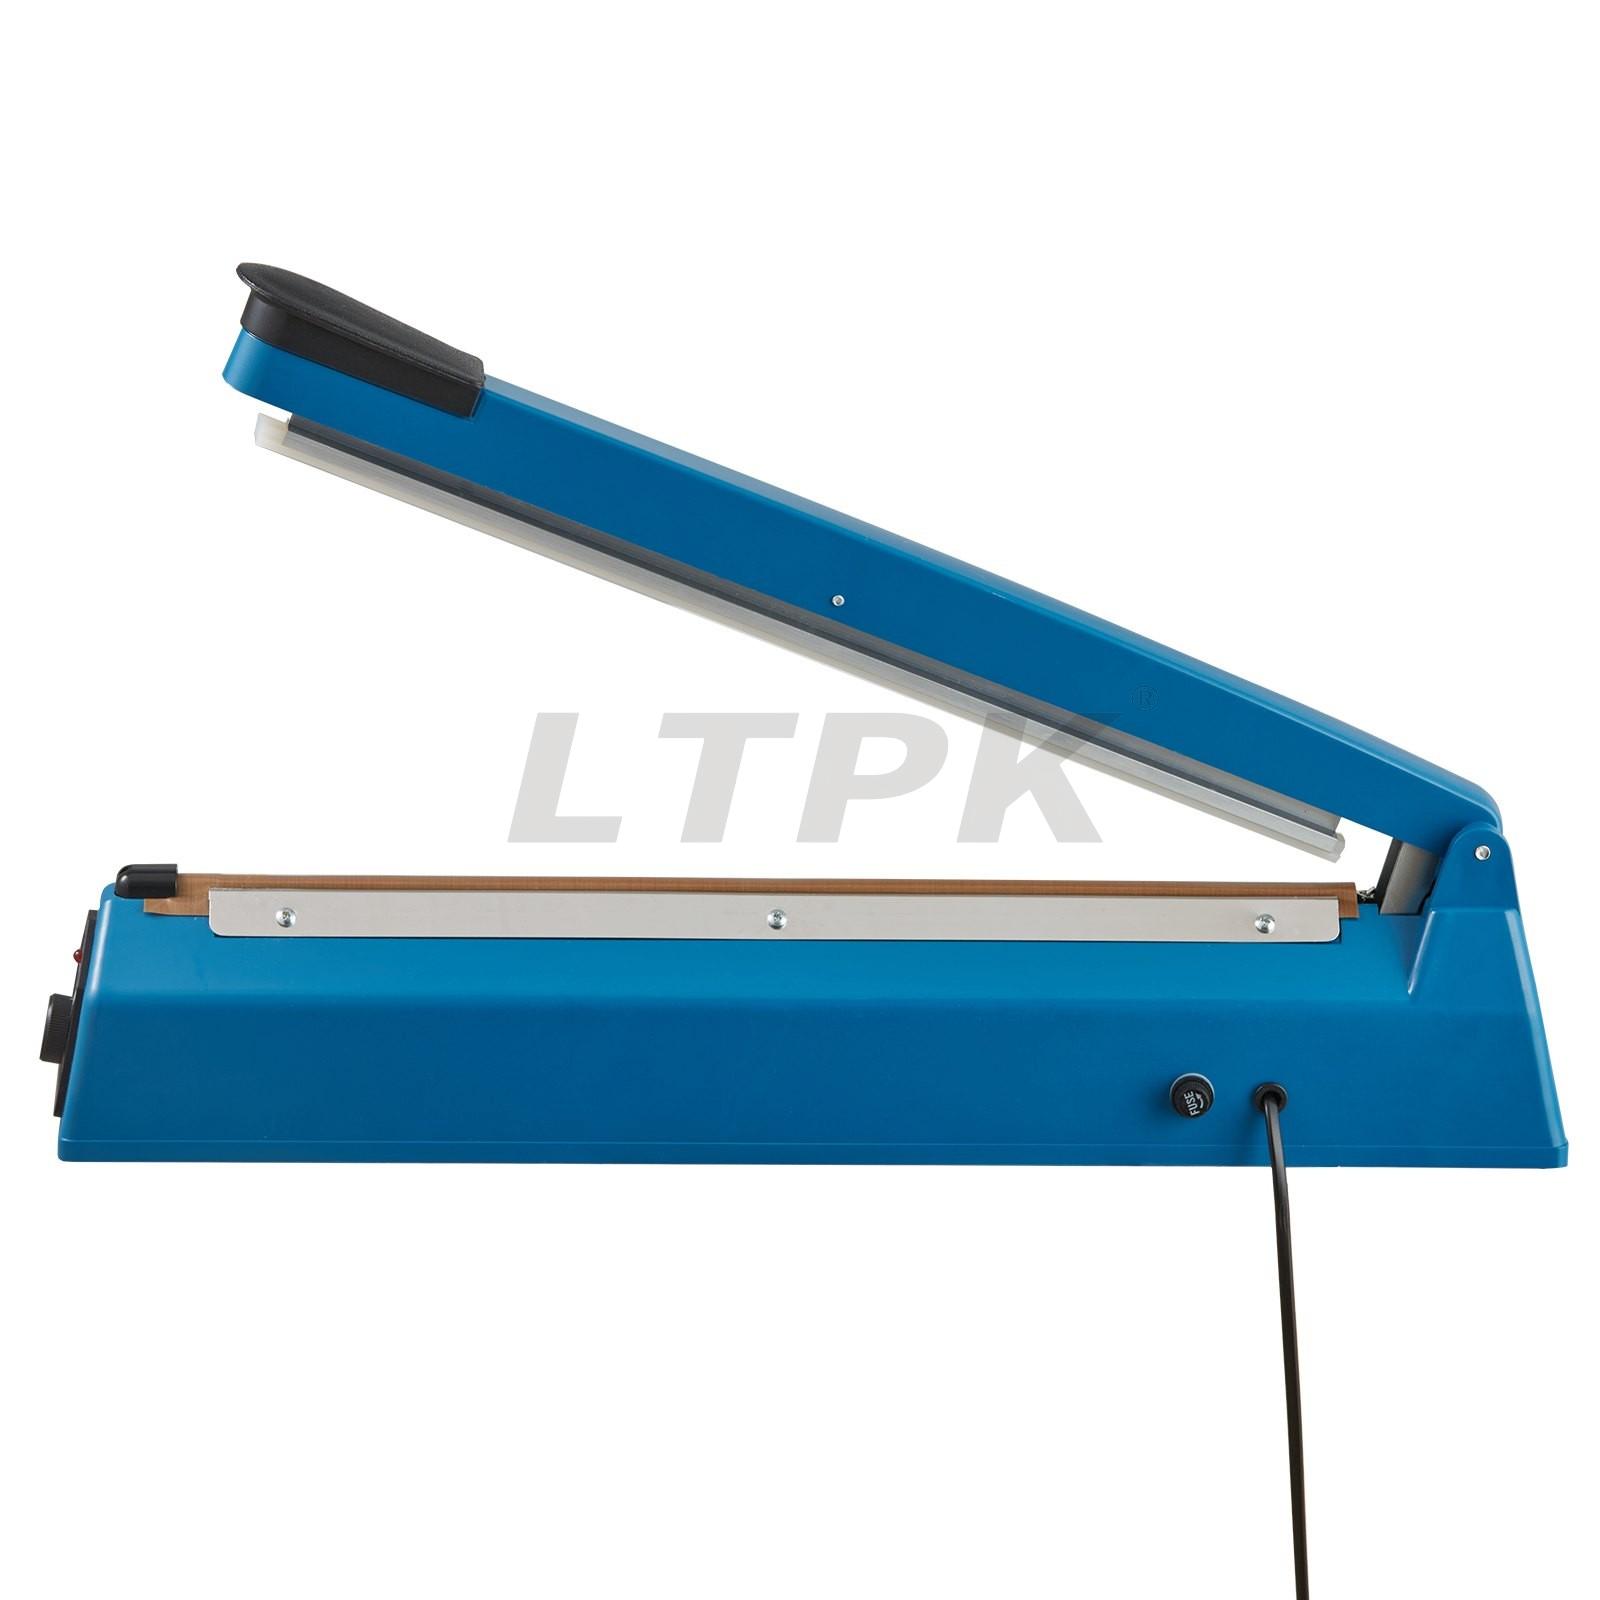 LTPK PFS-400A Manual Heat Seal Machine with Adjustable Heating Mode